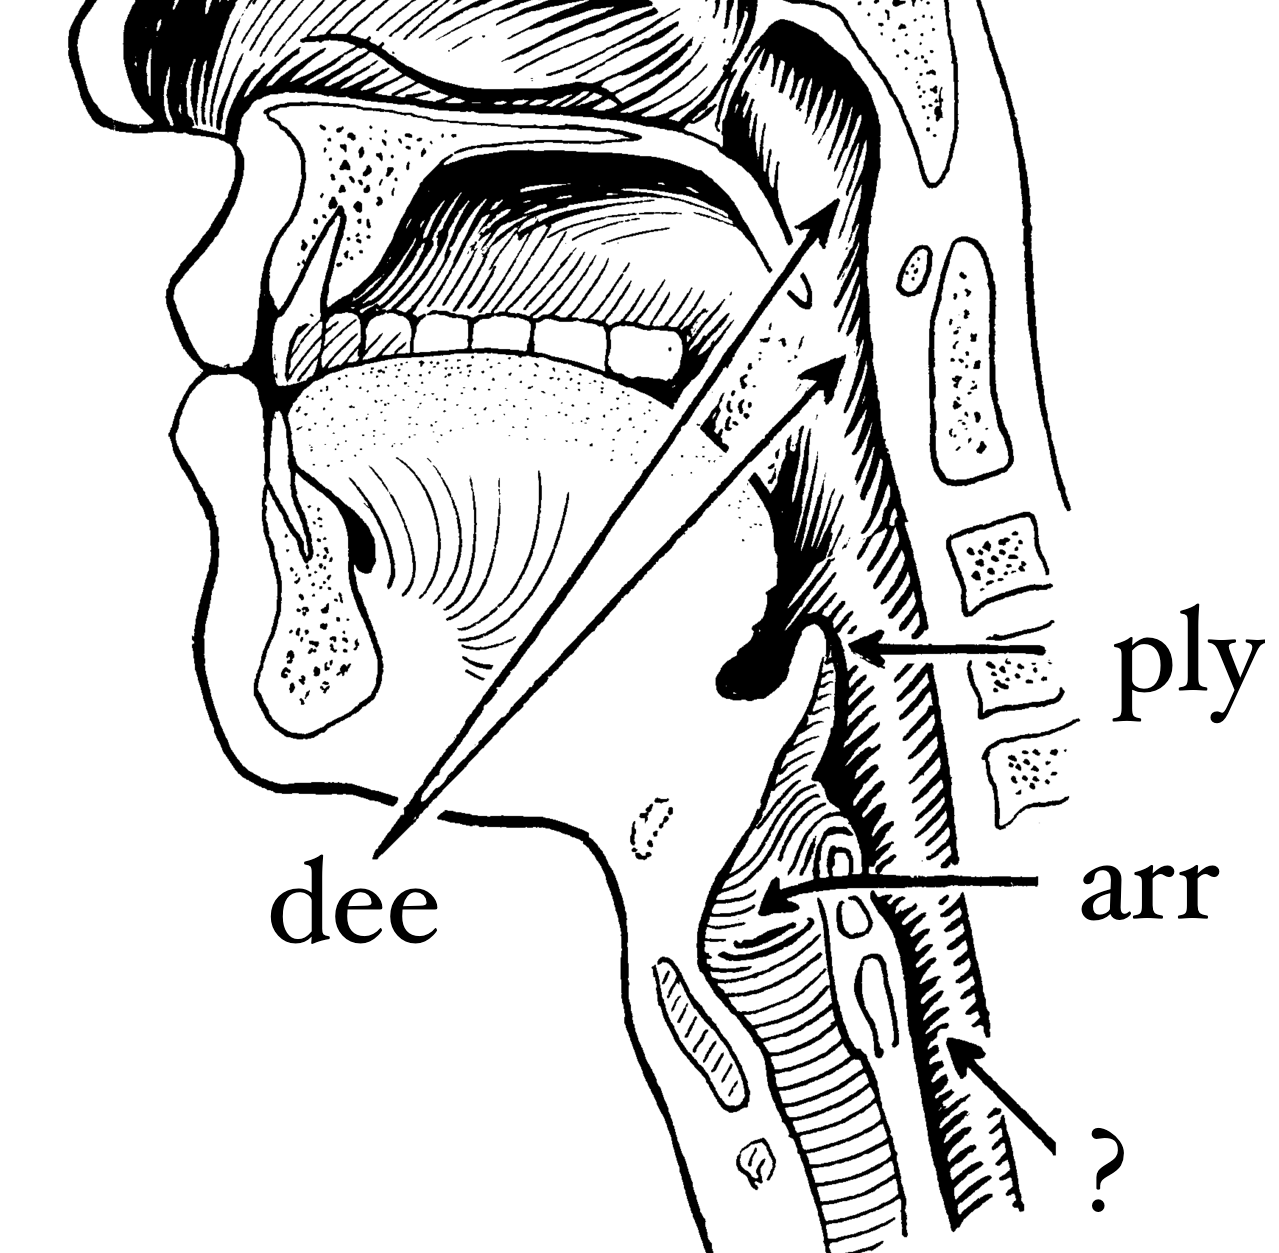 A line-drawing of a human larynx cross-section labelled with 'dee', 'ply', 'arr' and a question mark.